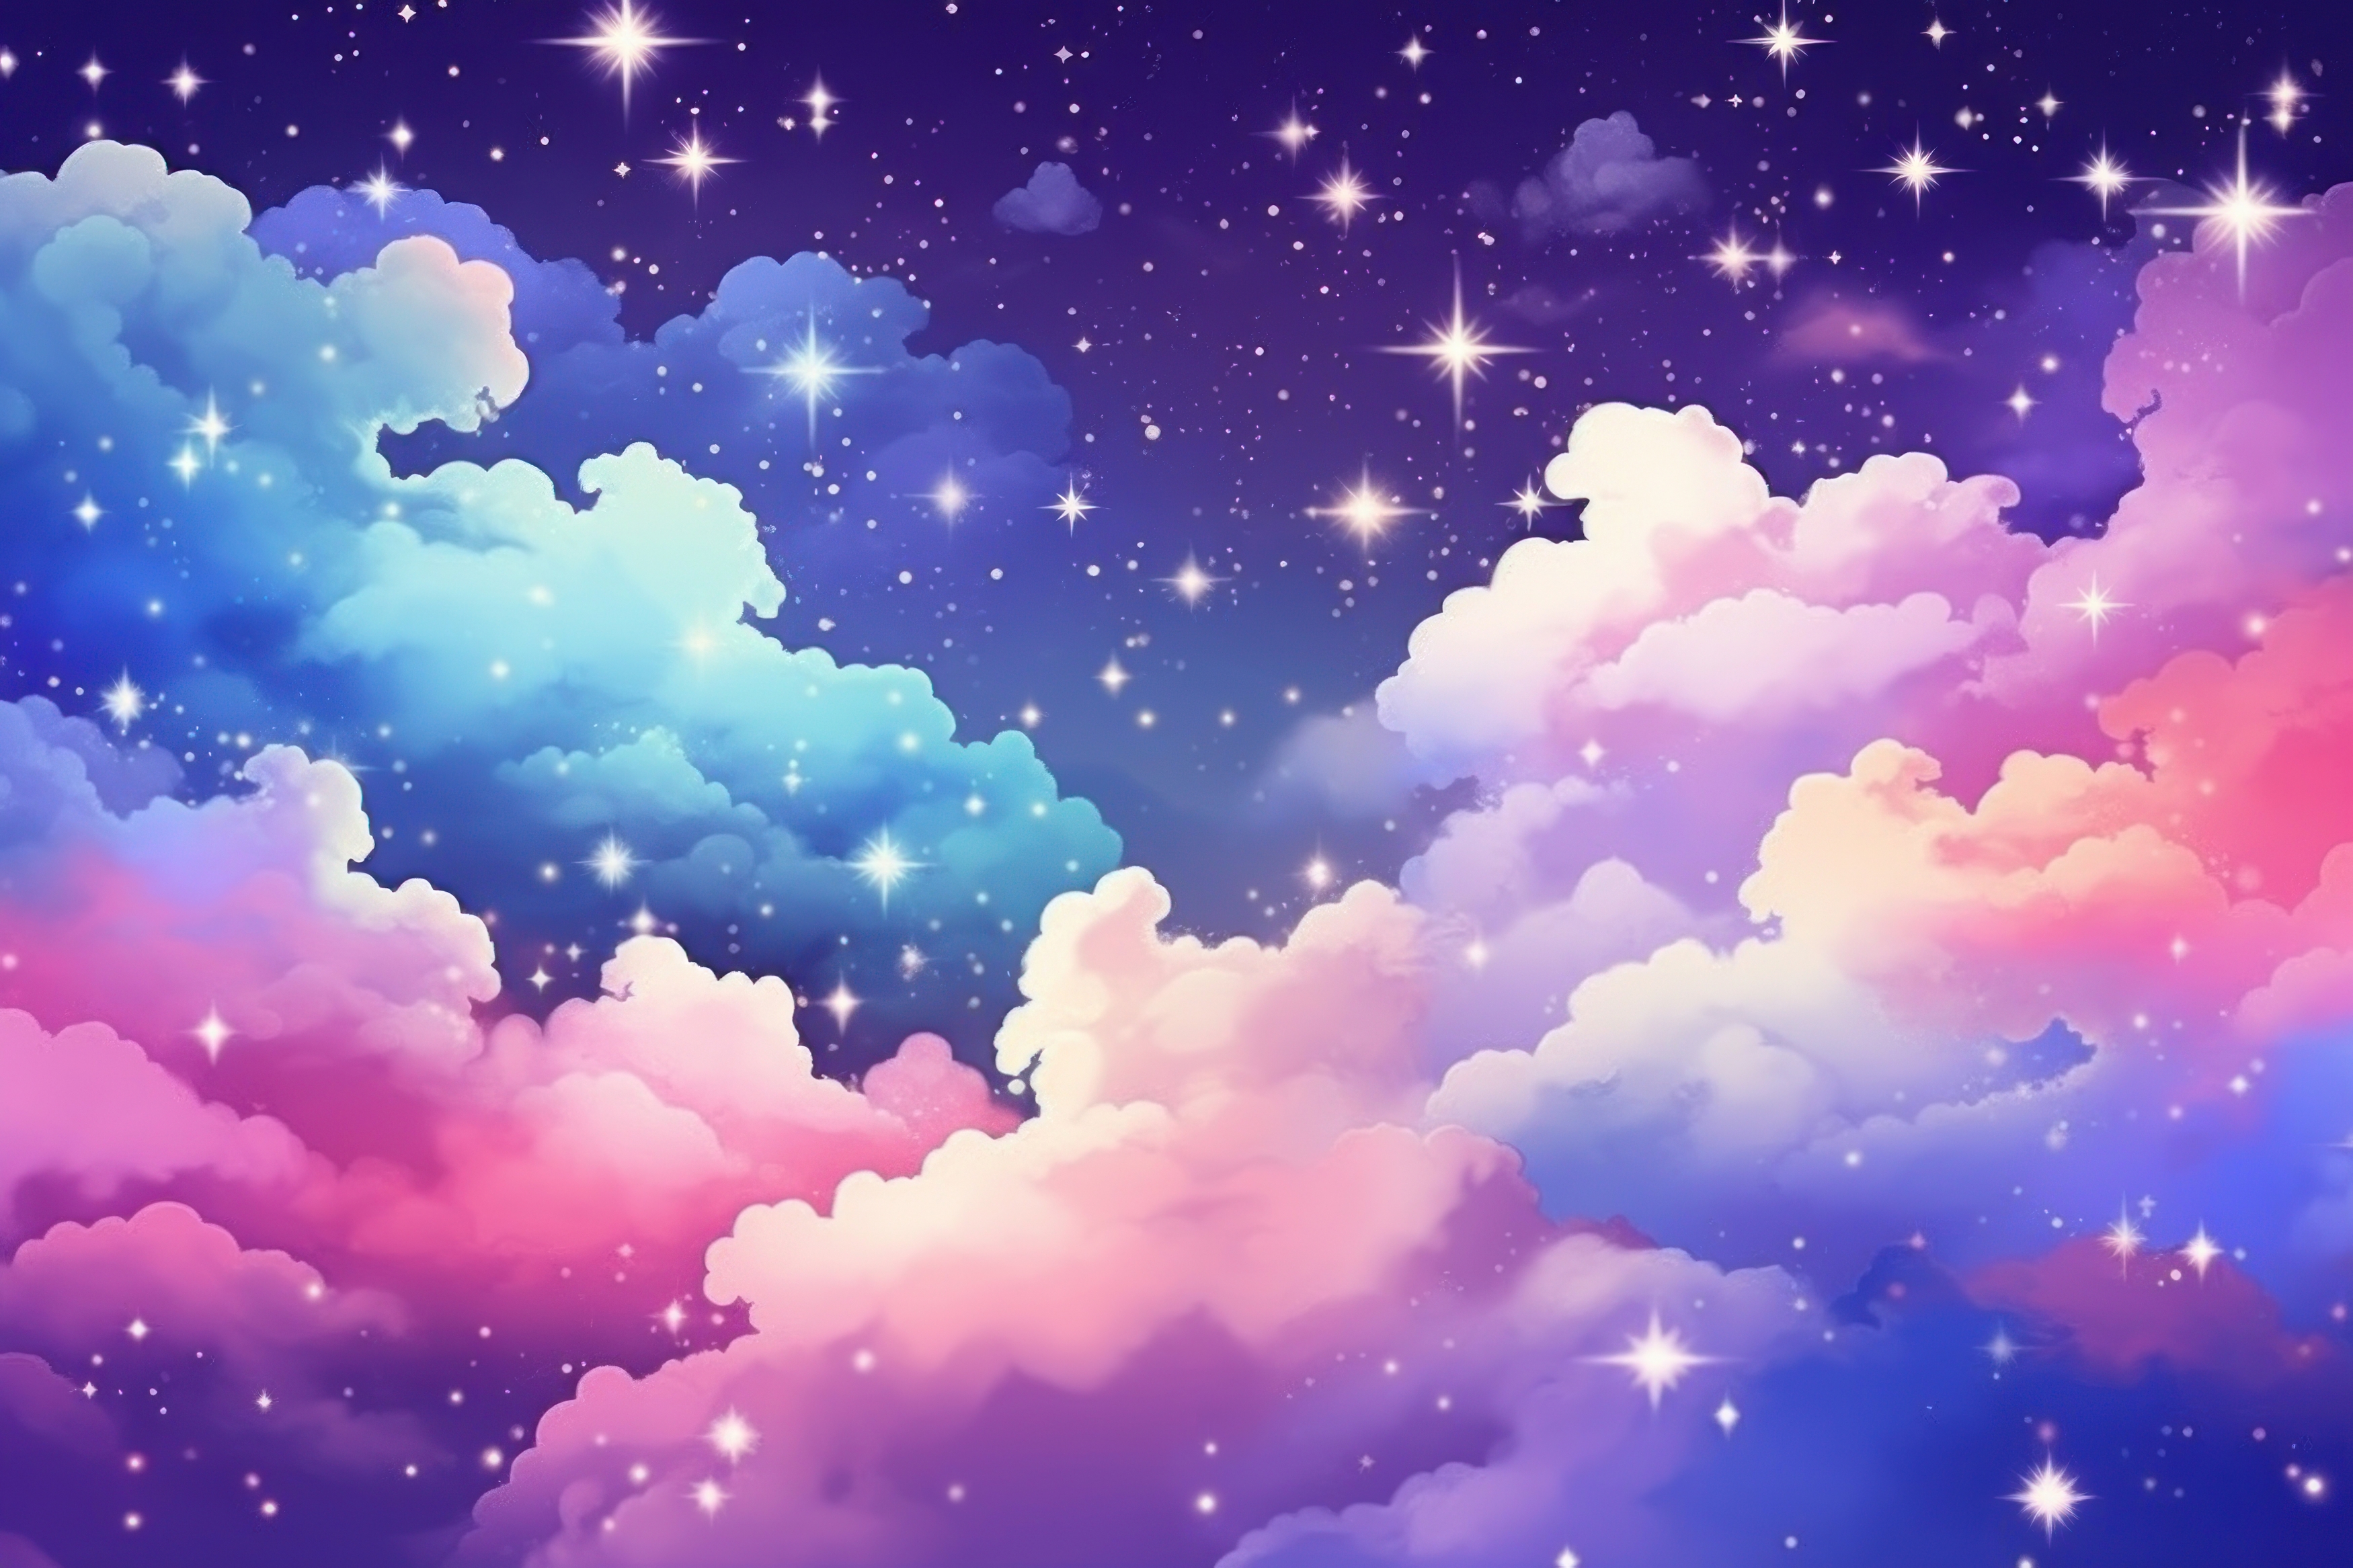 Sky filled with clouds and stars cute wallpaper backgrounds outdoors